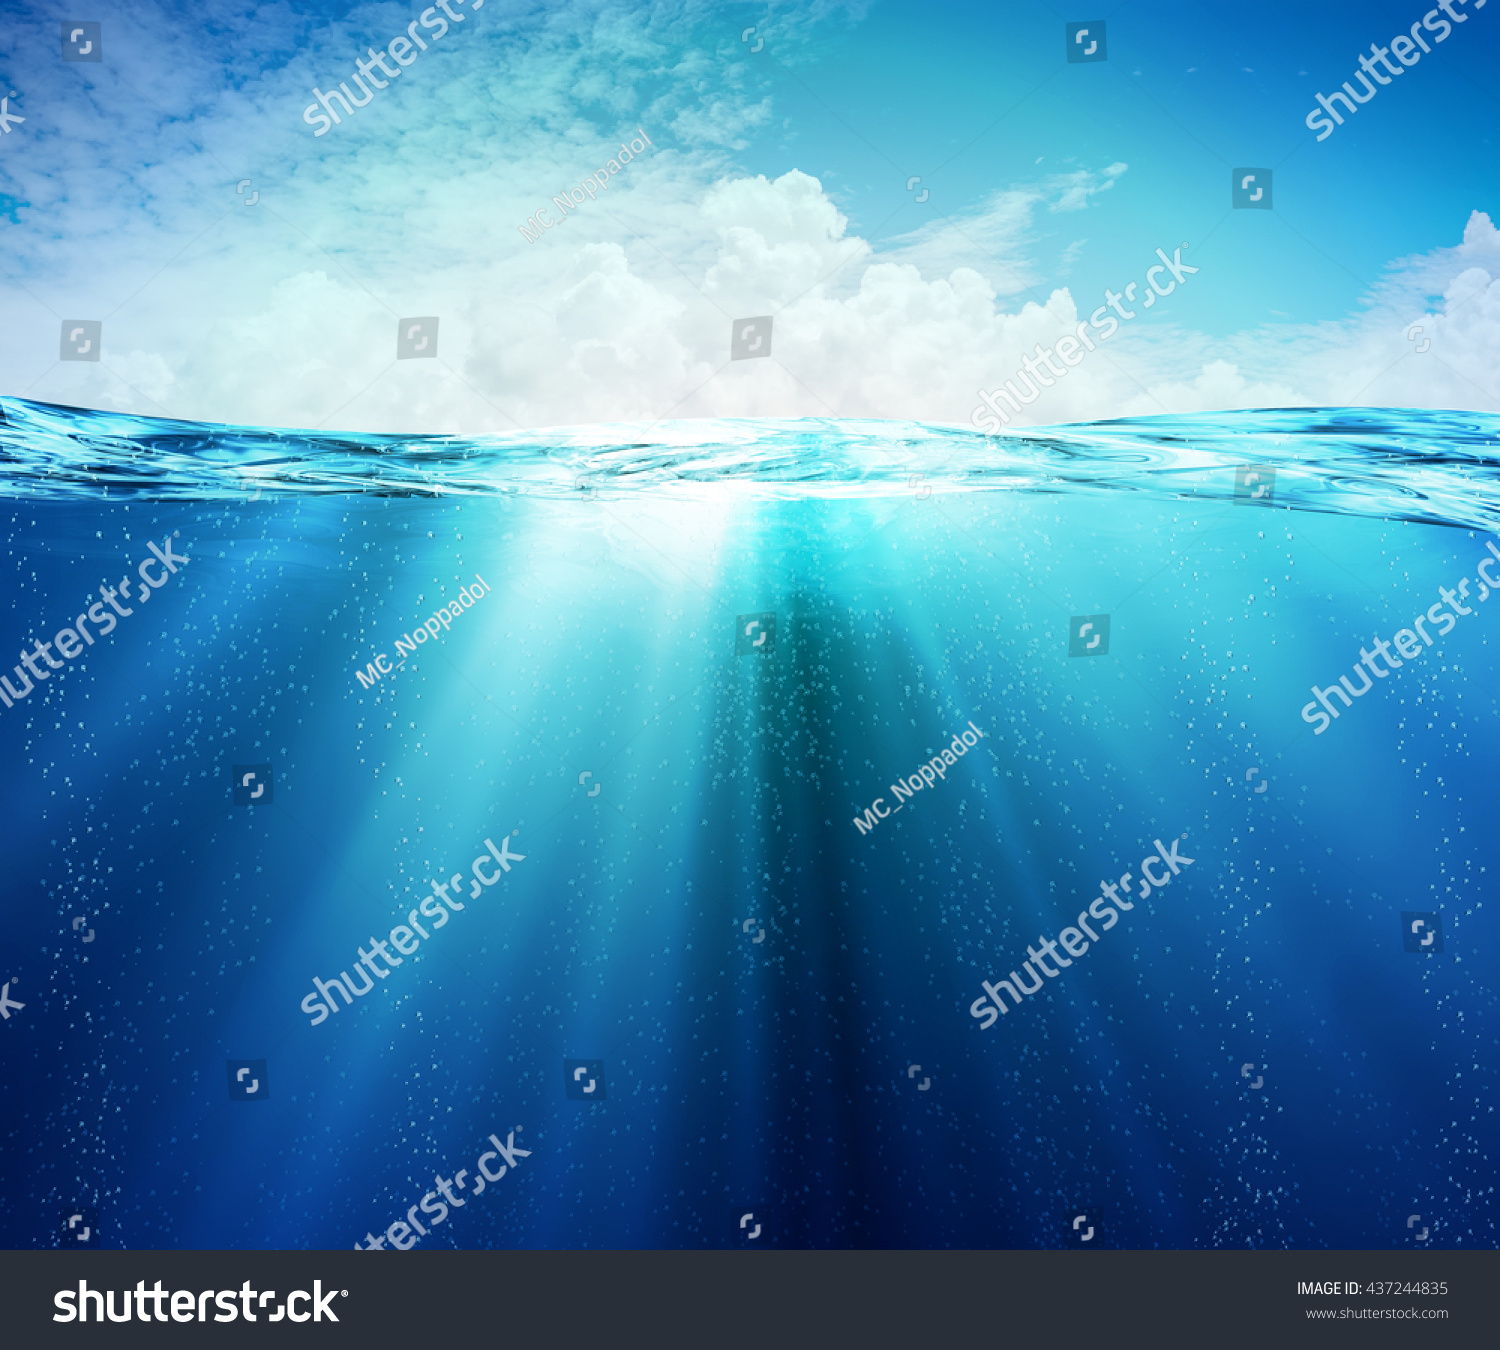 Underwater or under the sea Beauty turquoise sea, In view of the sky bright atmosphere with some clouds. #437244835